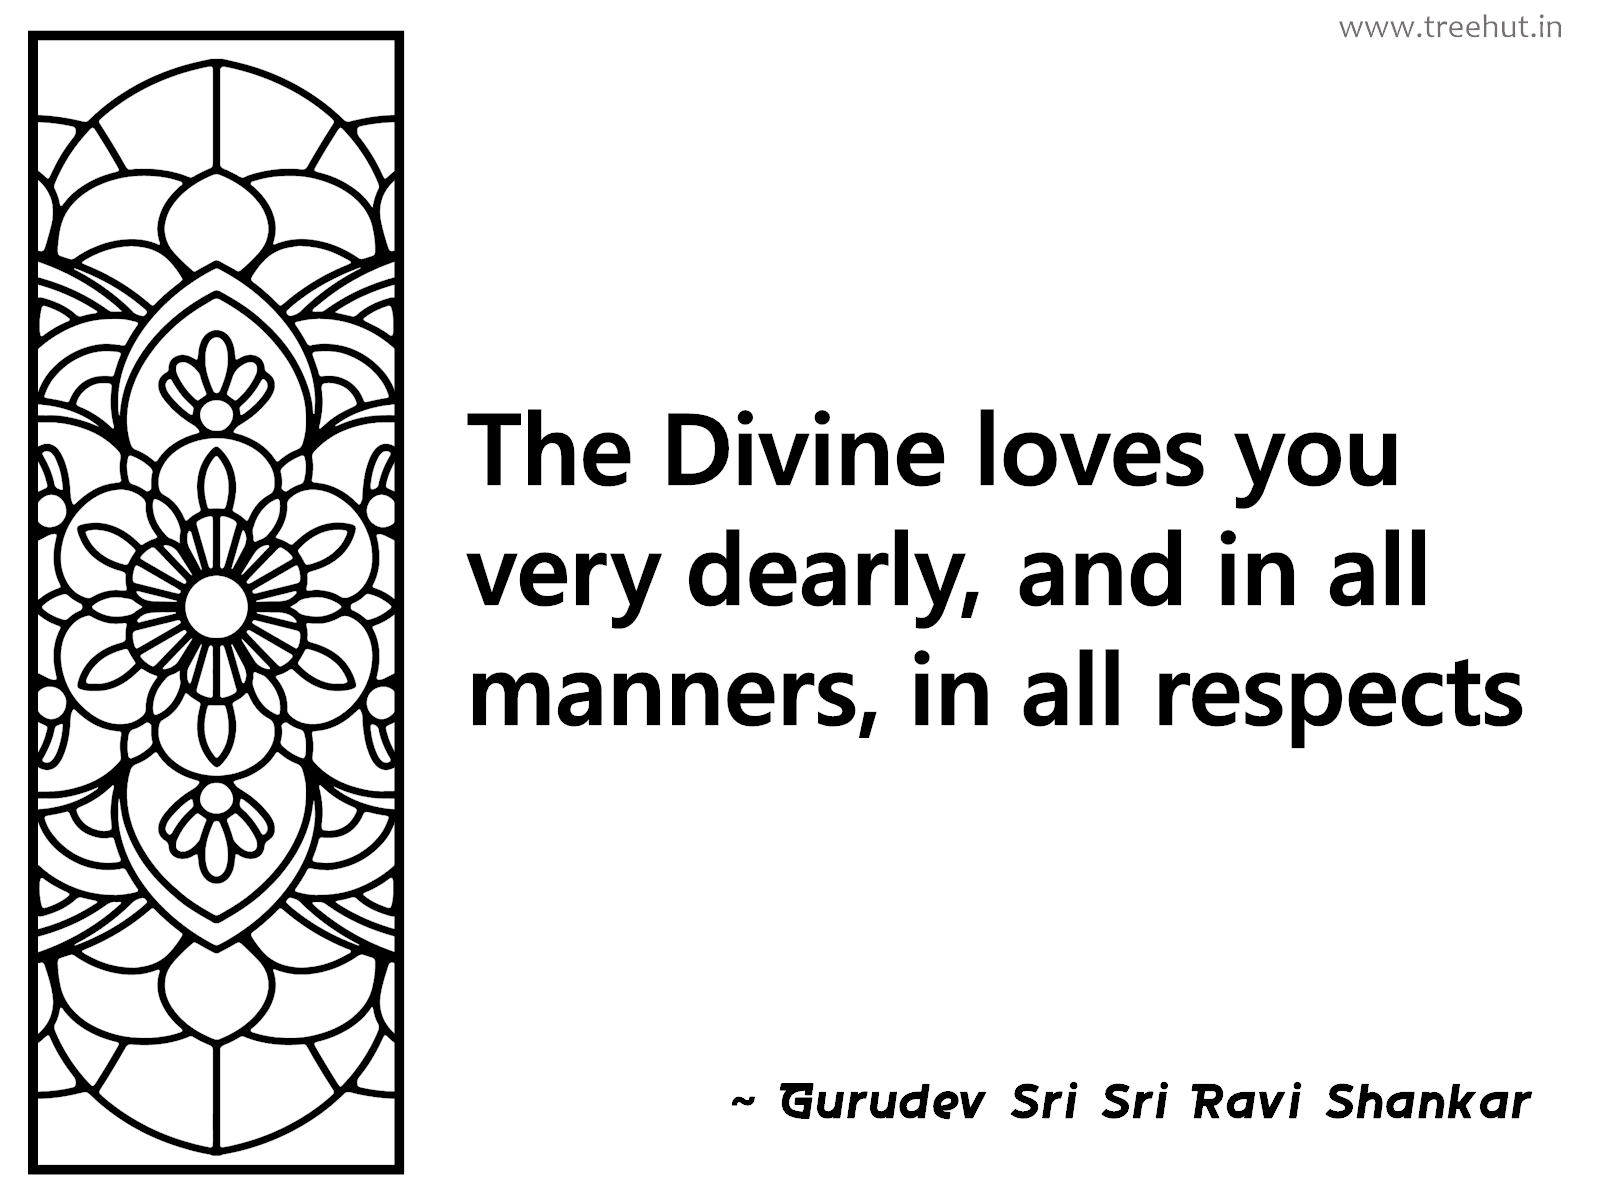 The Divine loves you very dearly, and in all manners, in all respects Inspirational Quote by Gurudev Sri Sri Ravi Shankar, coloring pages